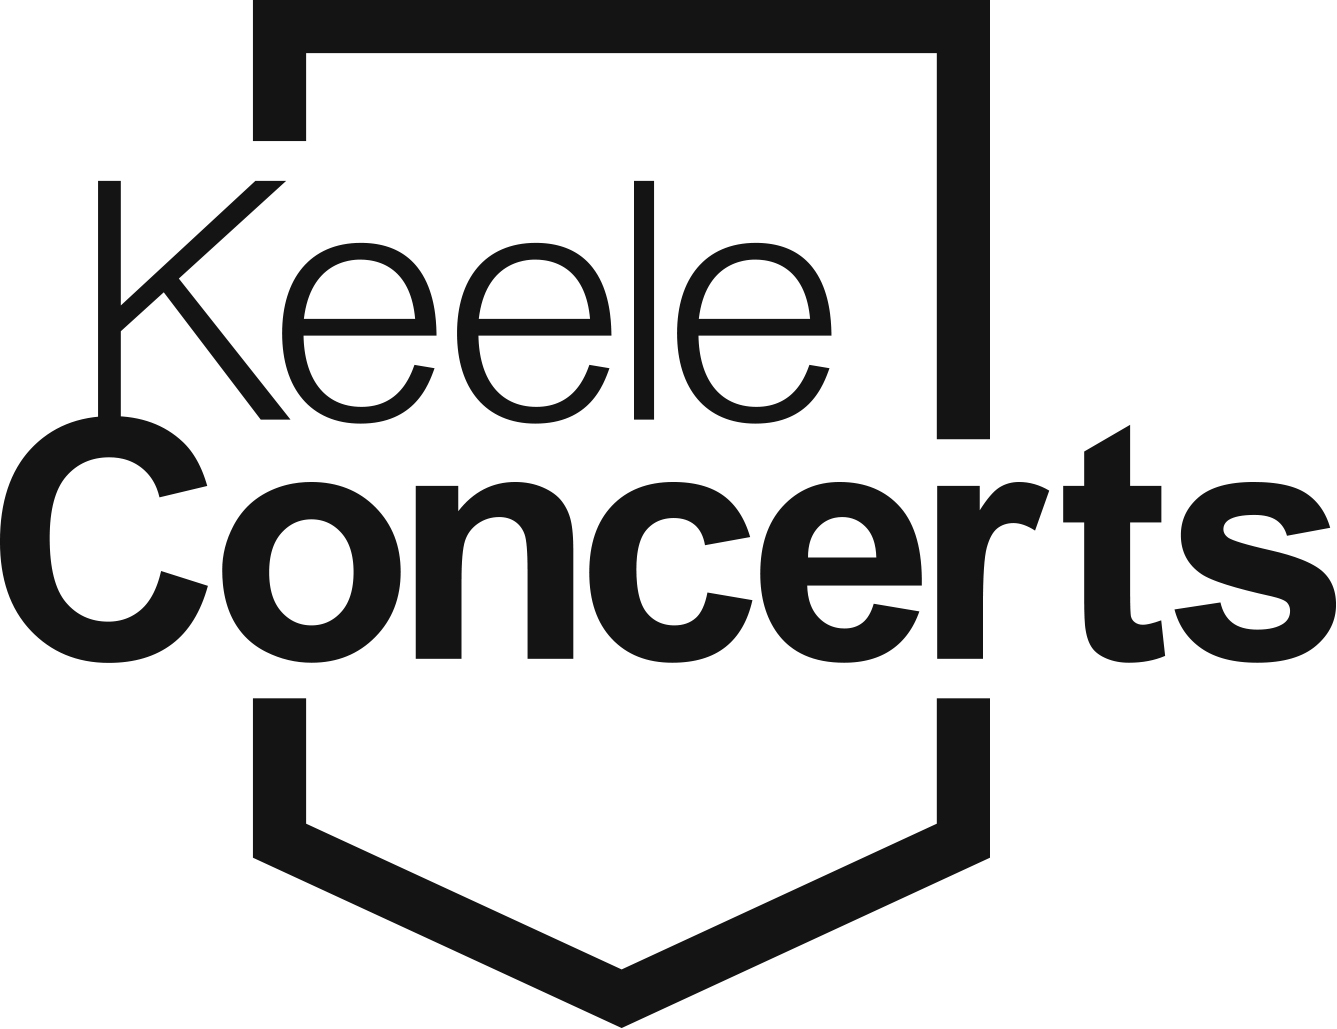 Keele Concerts subscription packages